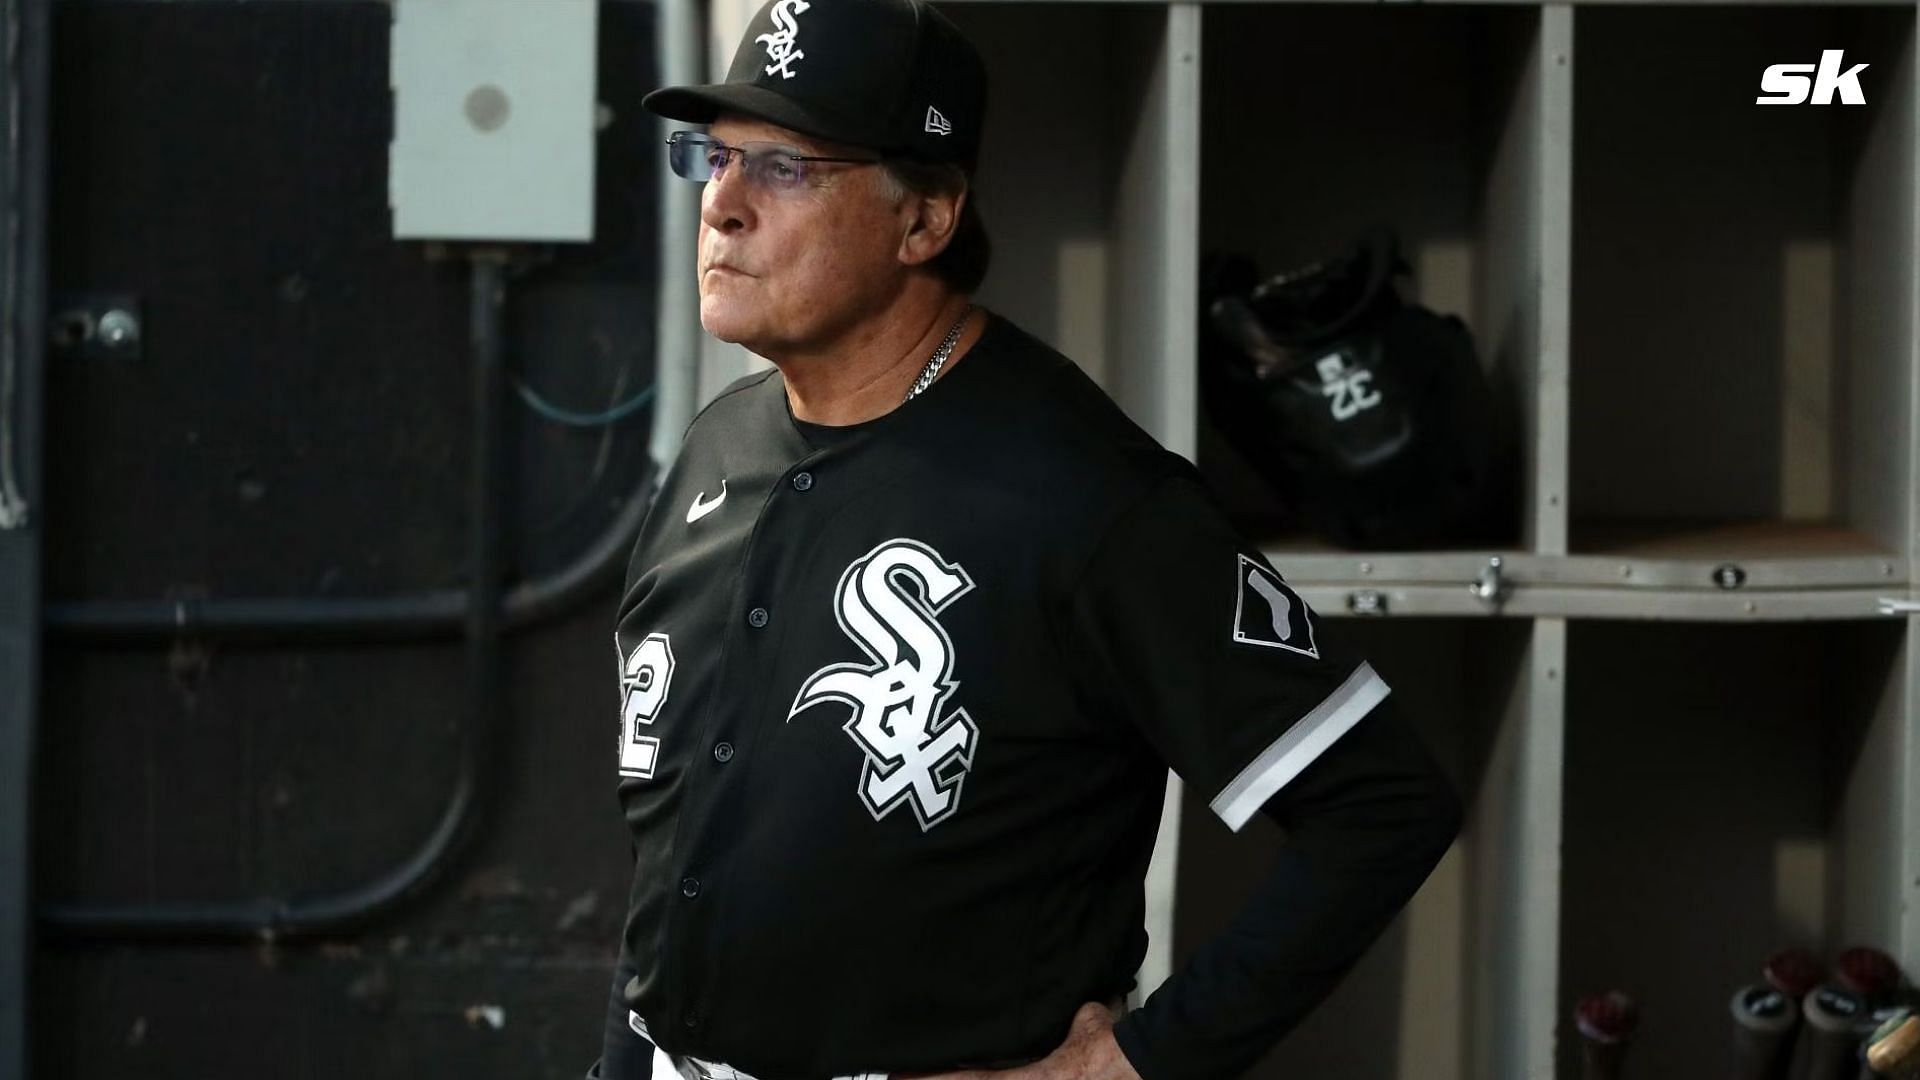 Former MLB manager Tony La Russa called out White Sox player Yermin  Mercedes for running up the score in a blowout game